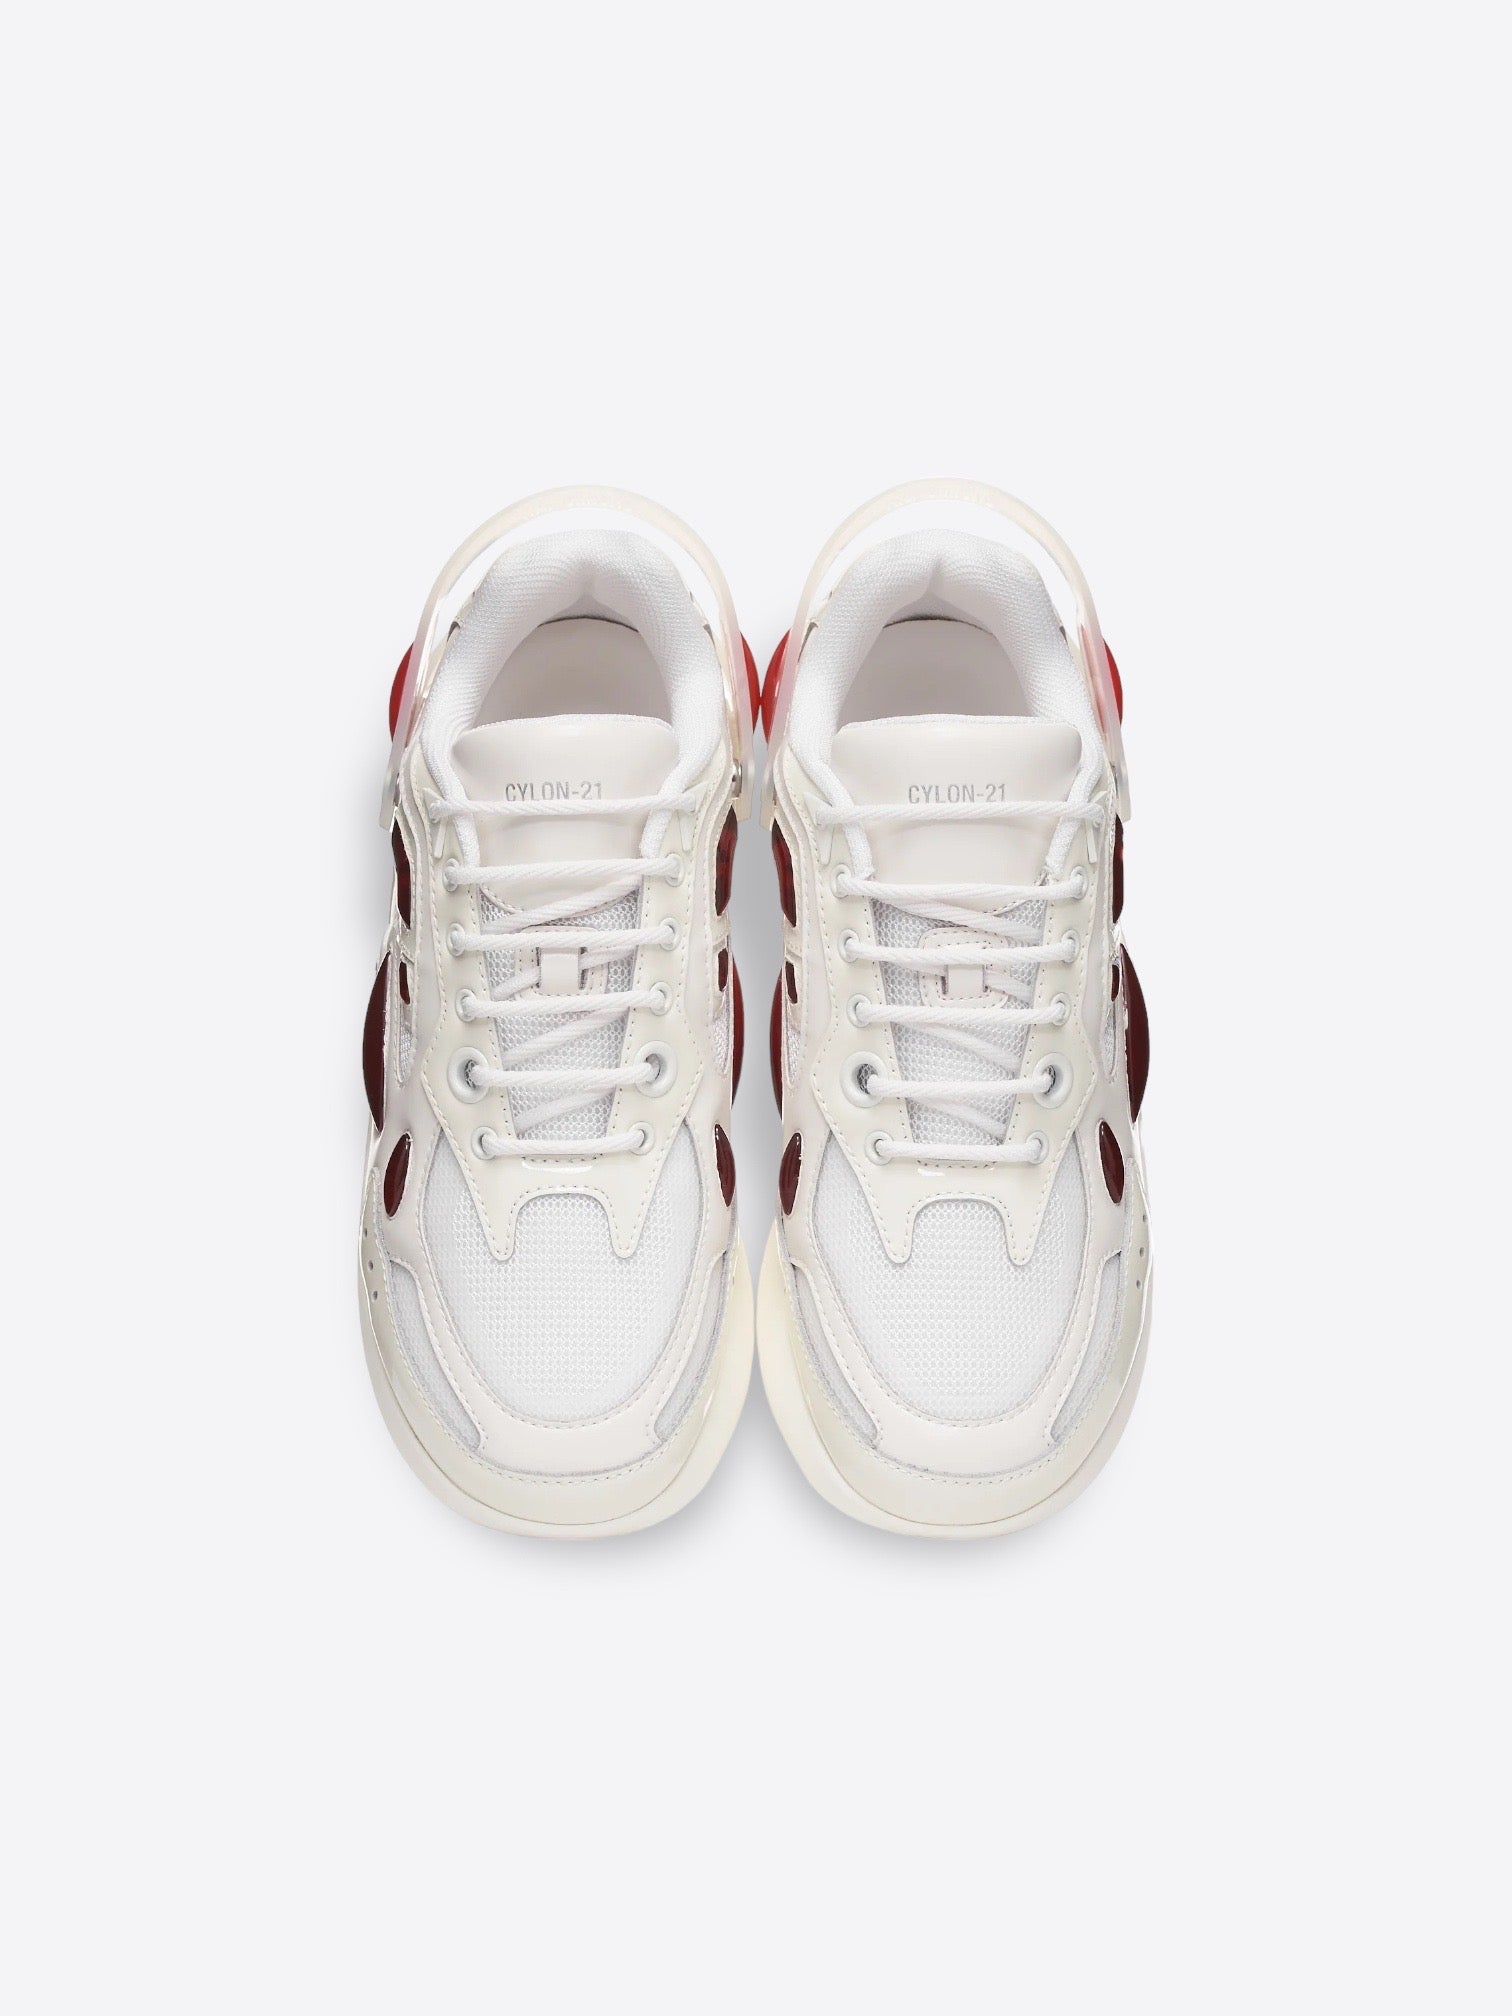 Raf Simons Cyclon-21 Sneakers SS23 Red Off-white